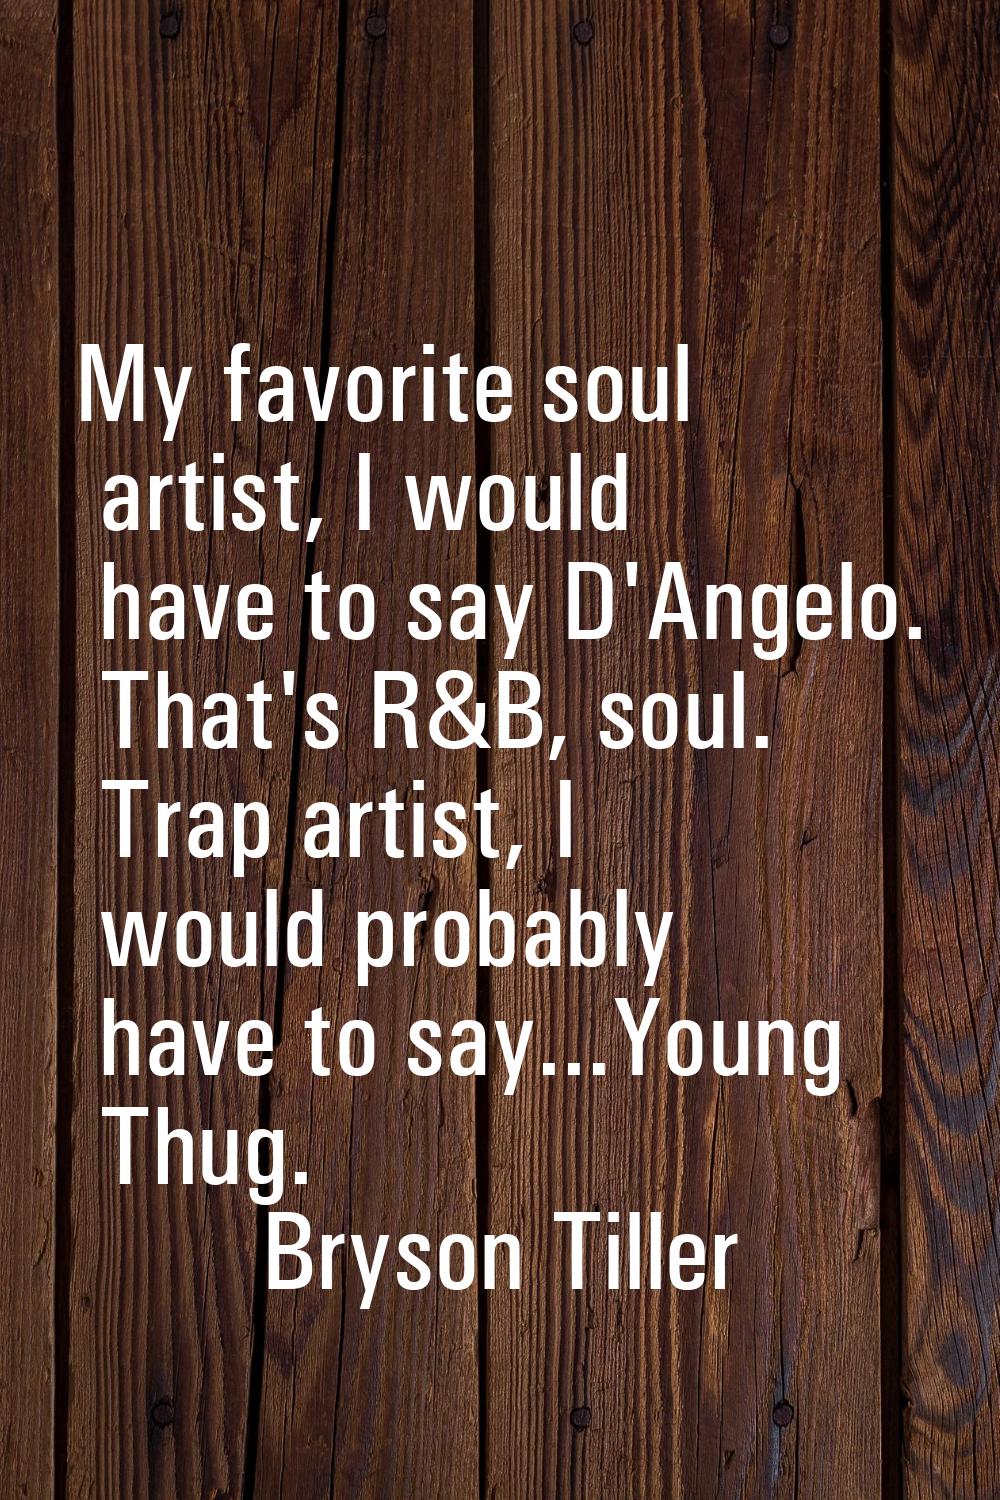 My favorite soul artist, I would have to say D'Angelo. That's R&B, soul. Trap artist, I would proba